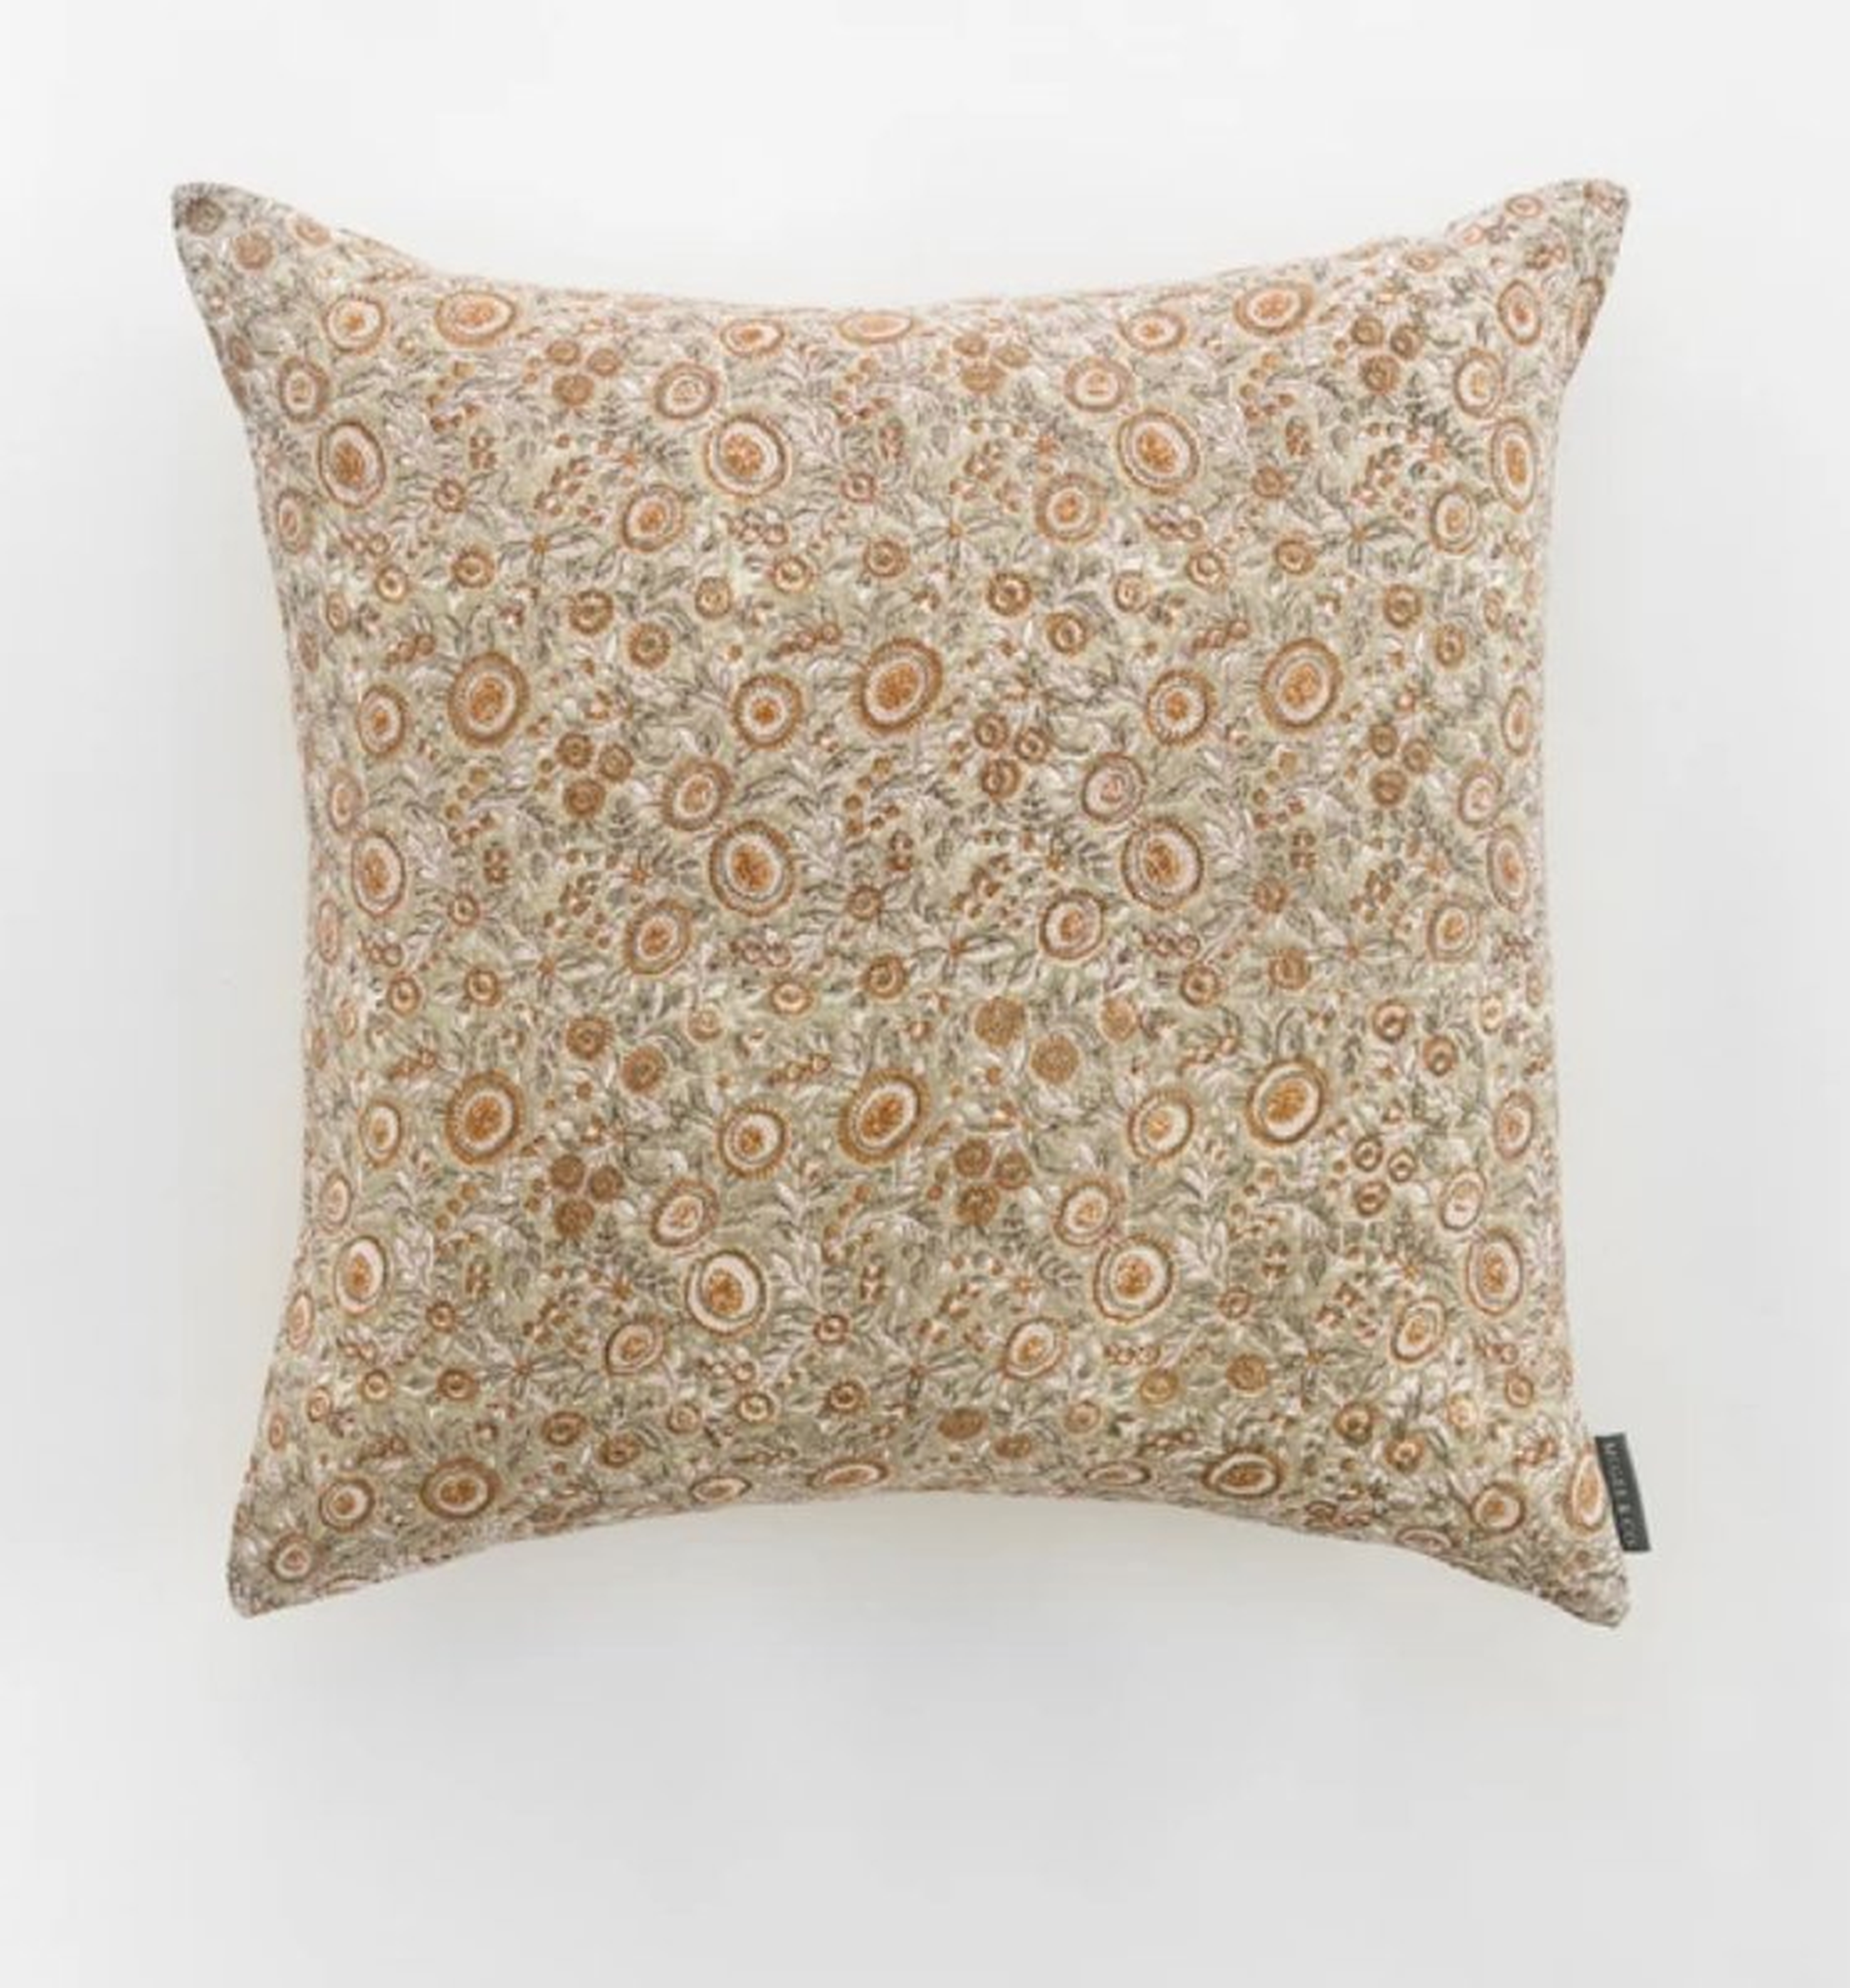 Anora Block Print Pillow Cover - 22x22 - McGee & Co.